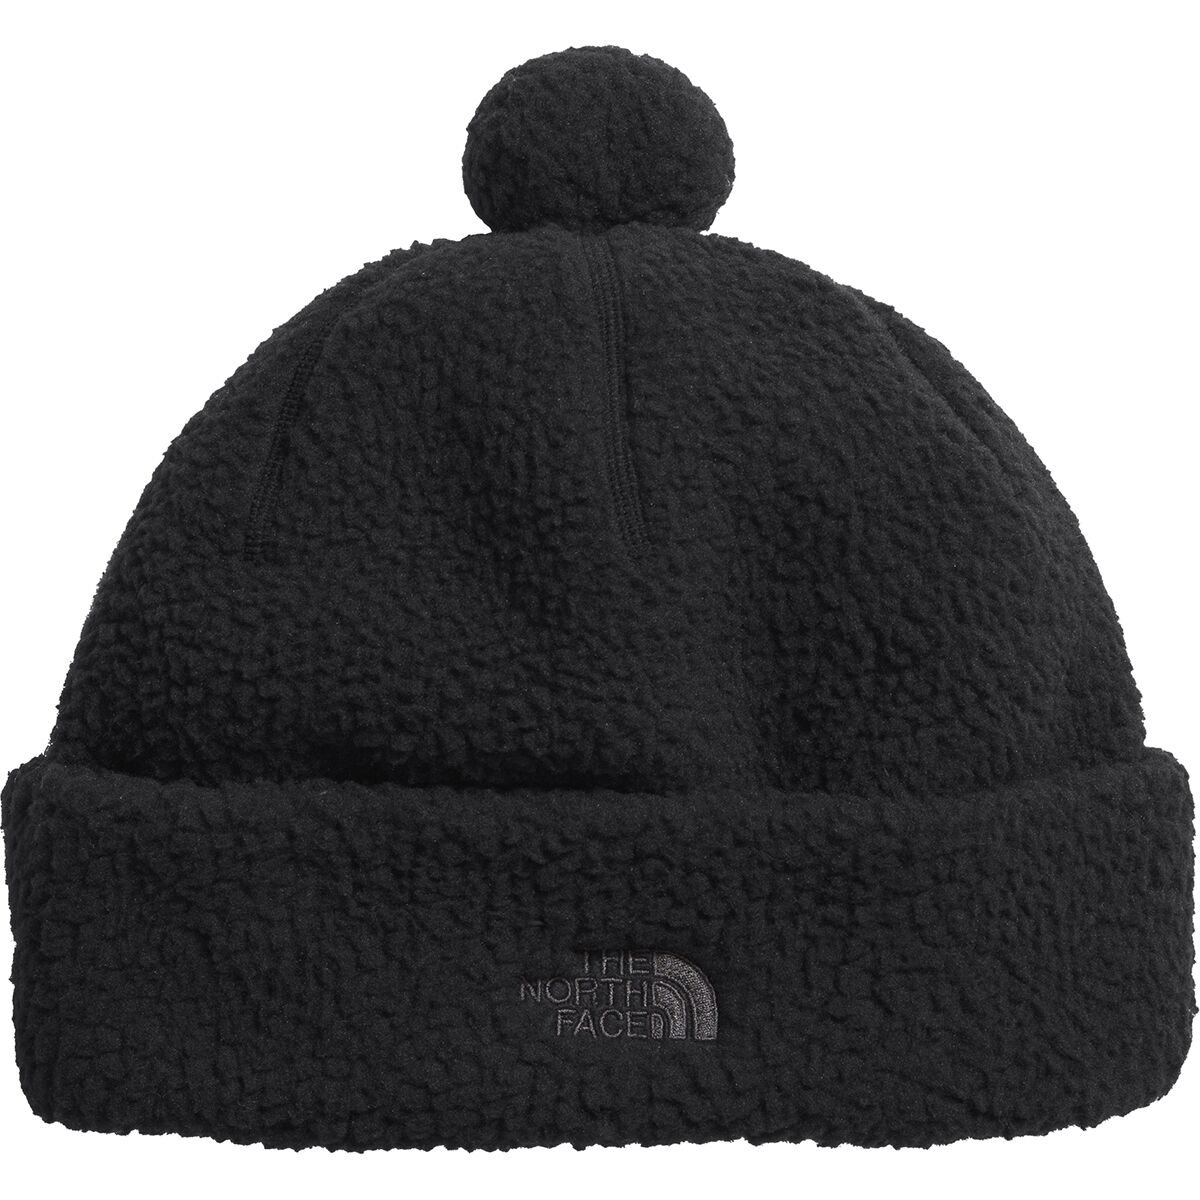 The North Face Hats, Caps & Beanies